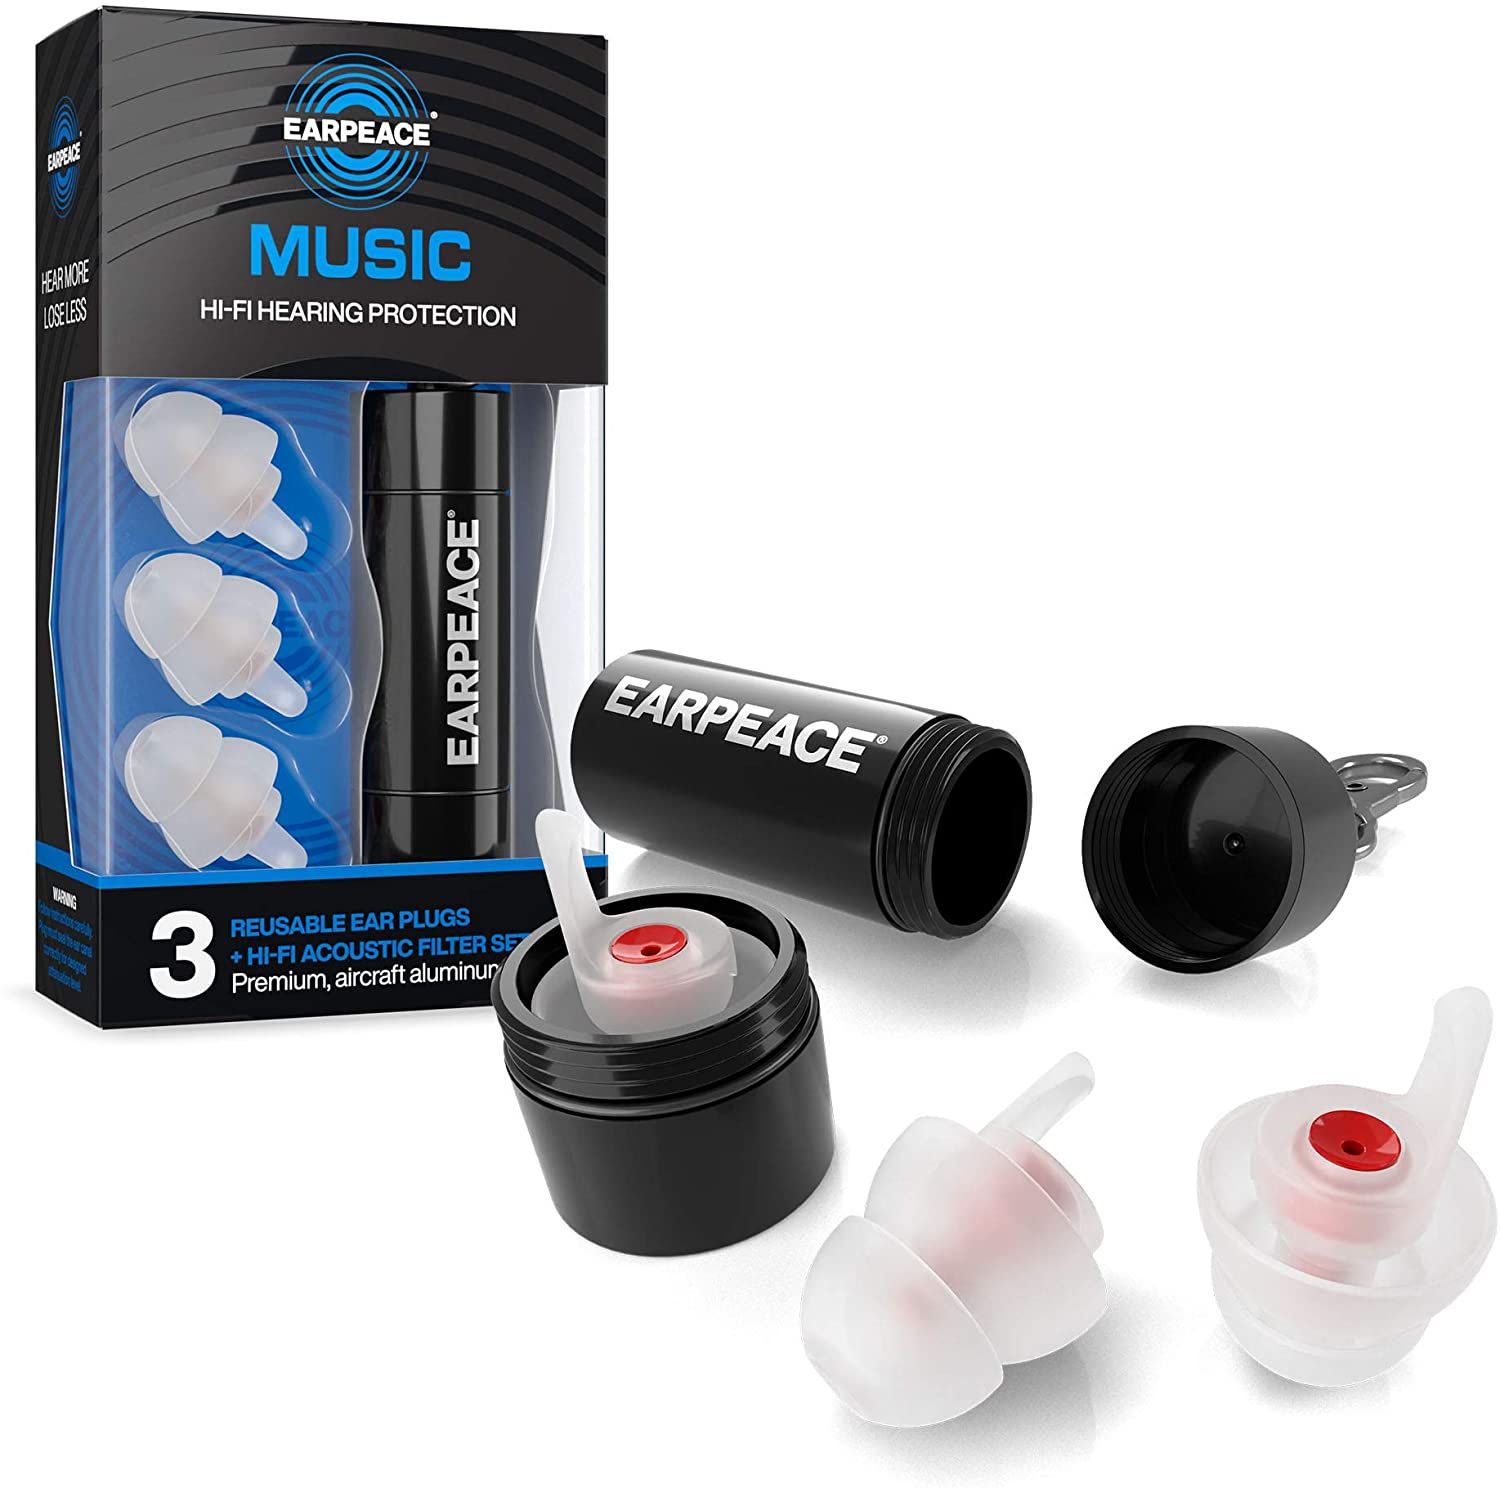 earplugs for concerts